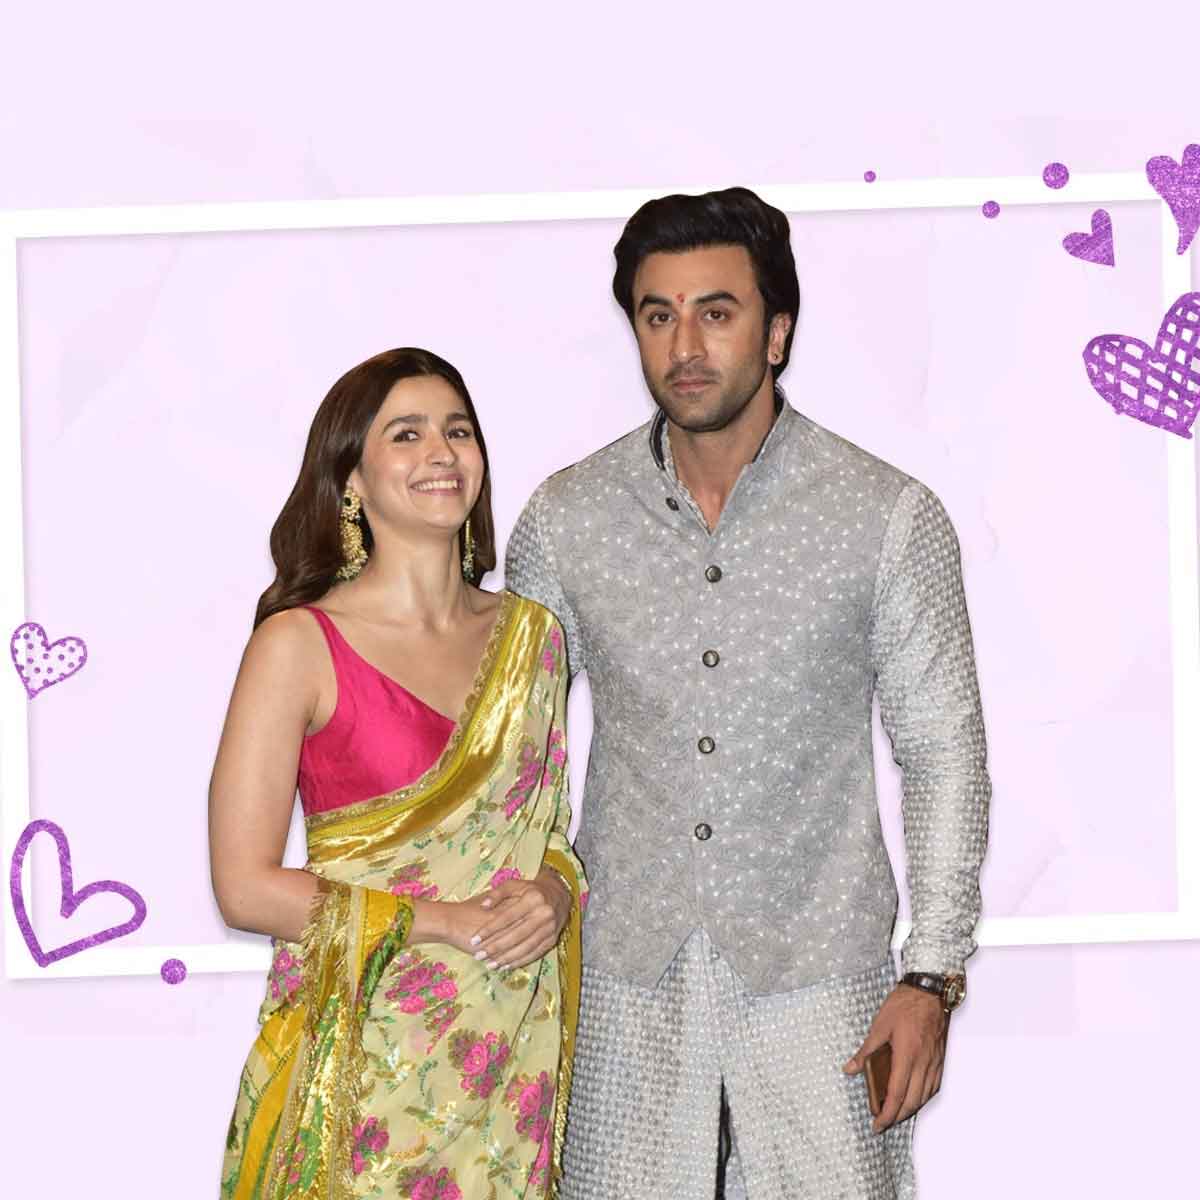 Ranbir Kapoor, Alia Bhatt wedding date, venue, guest list, Mehendi details: All you need to know about it